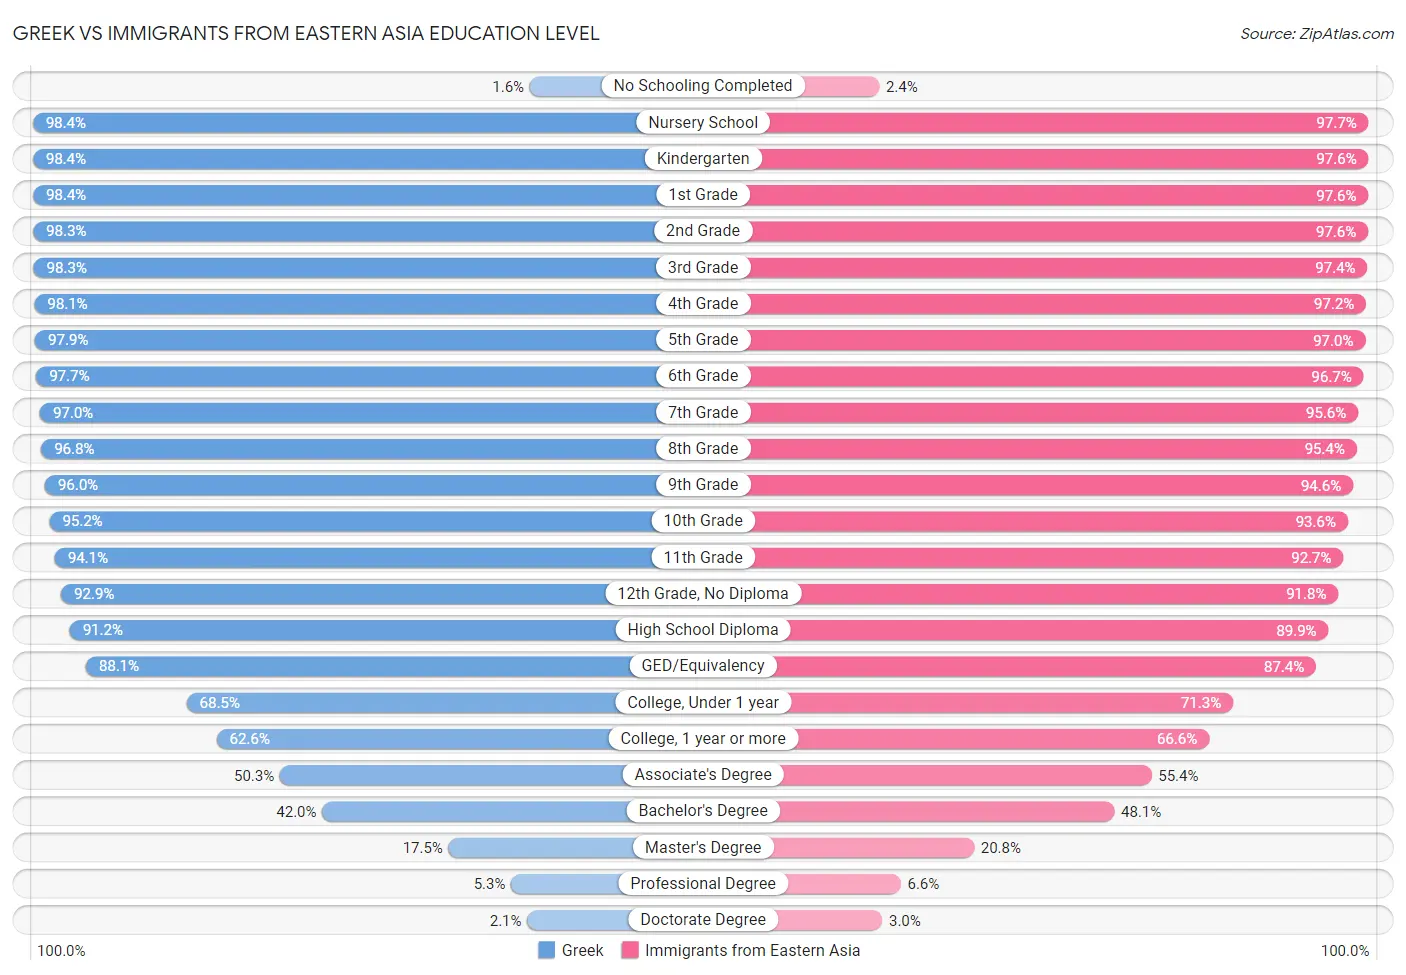 Greek vs Immigrants from Eastern Asia Education Level